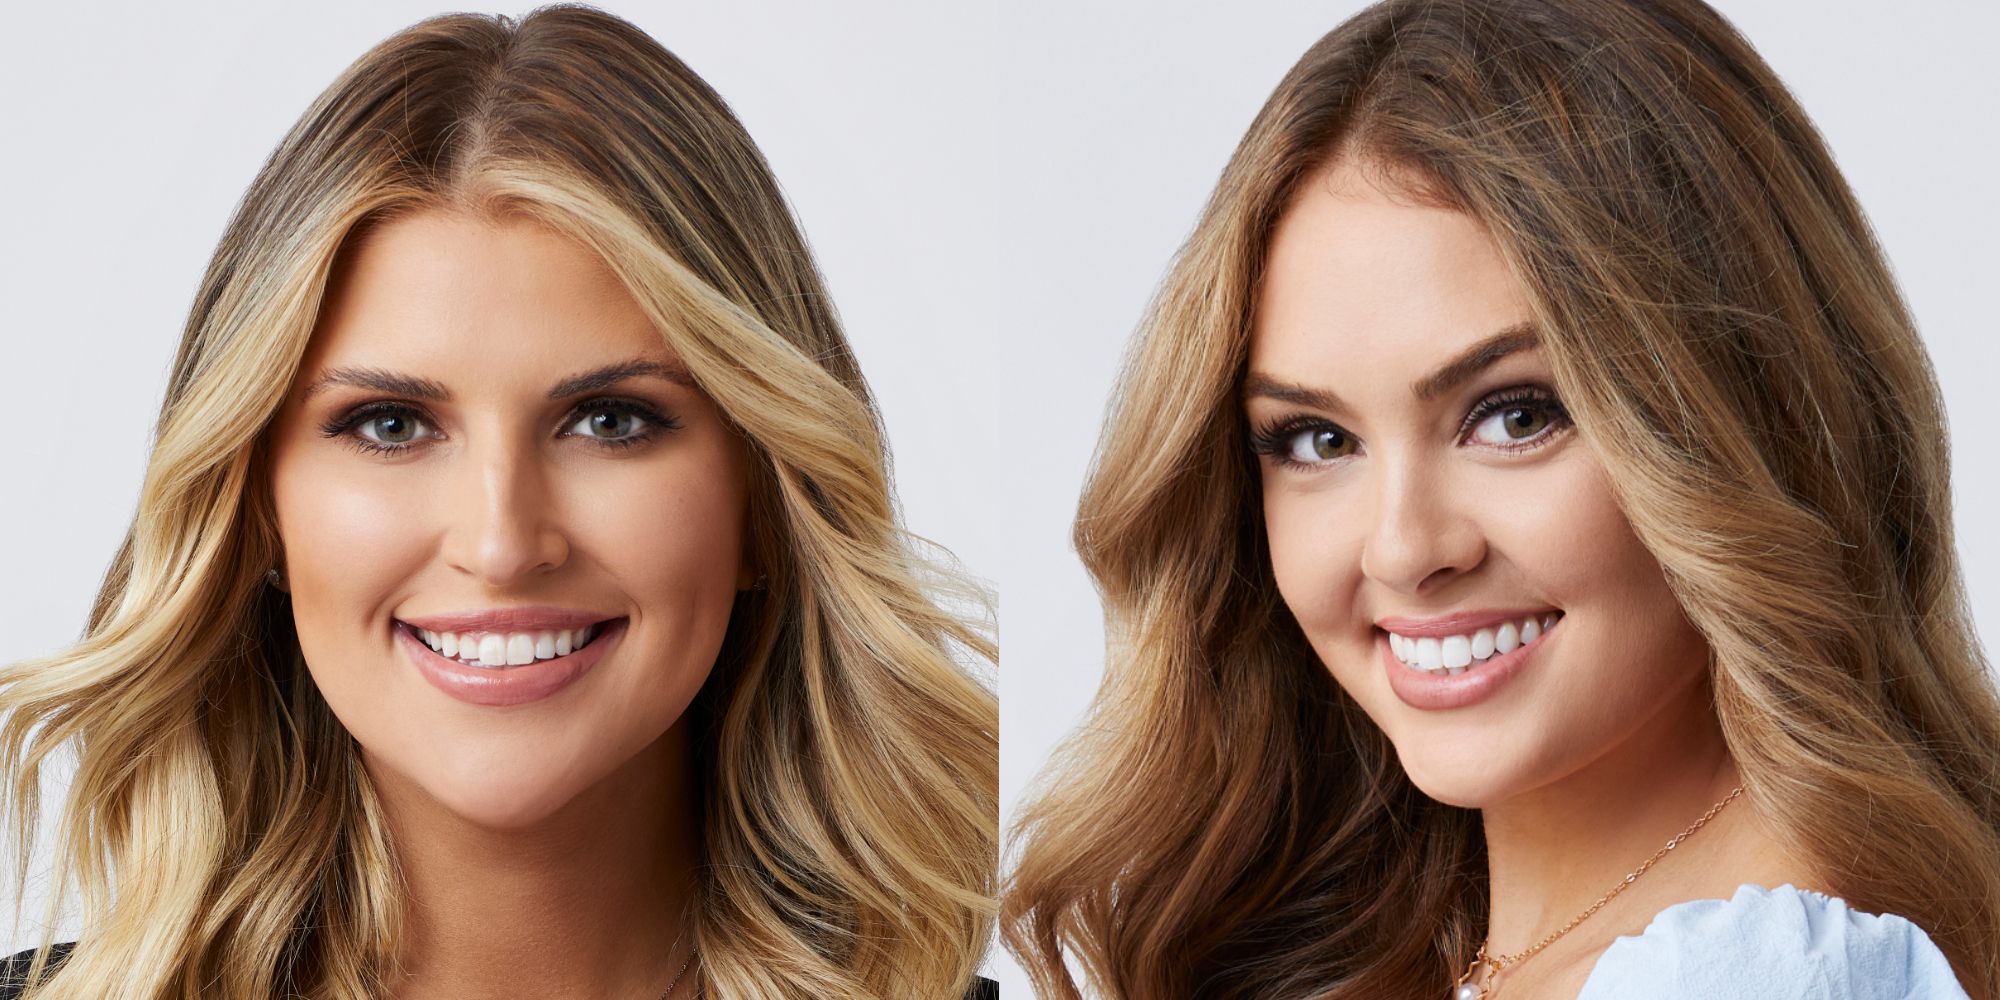 Claire Heilig and Susie Evans on The Bachelor season 26